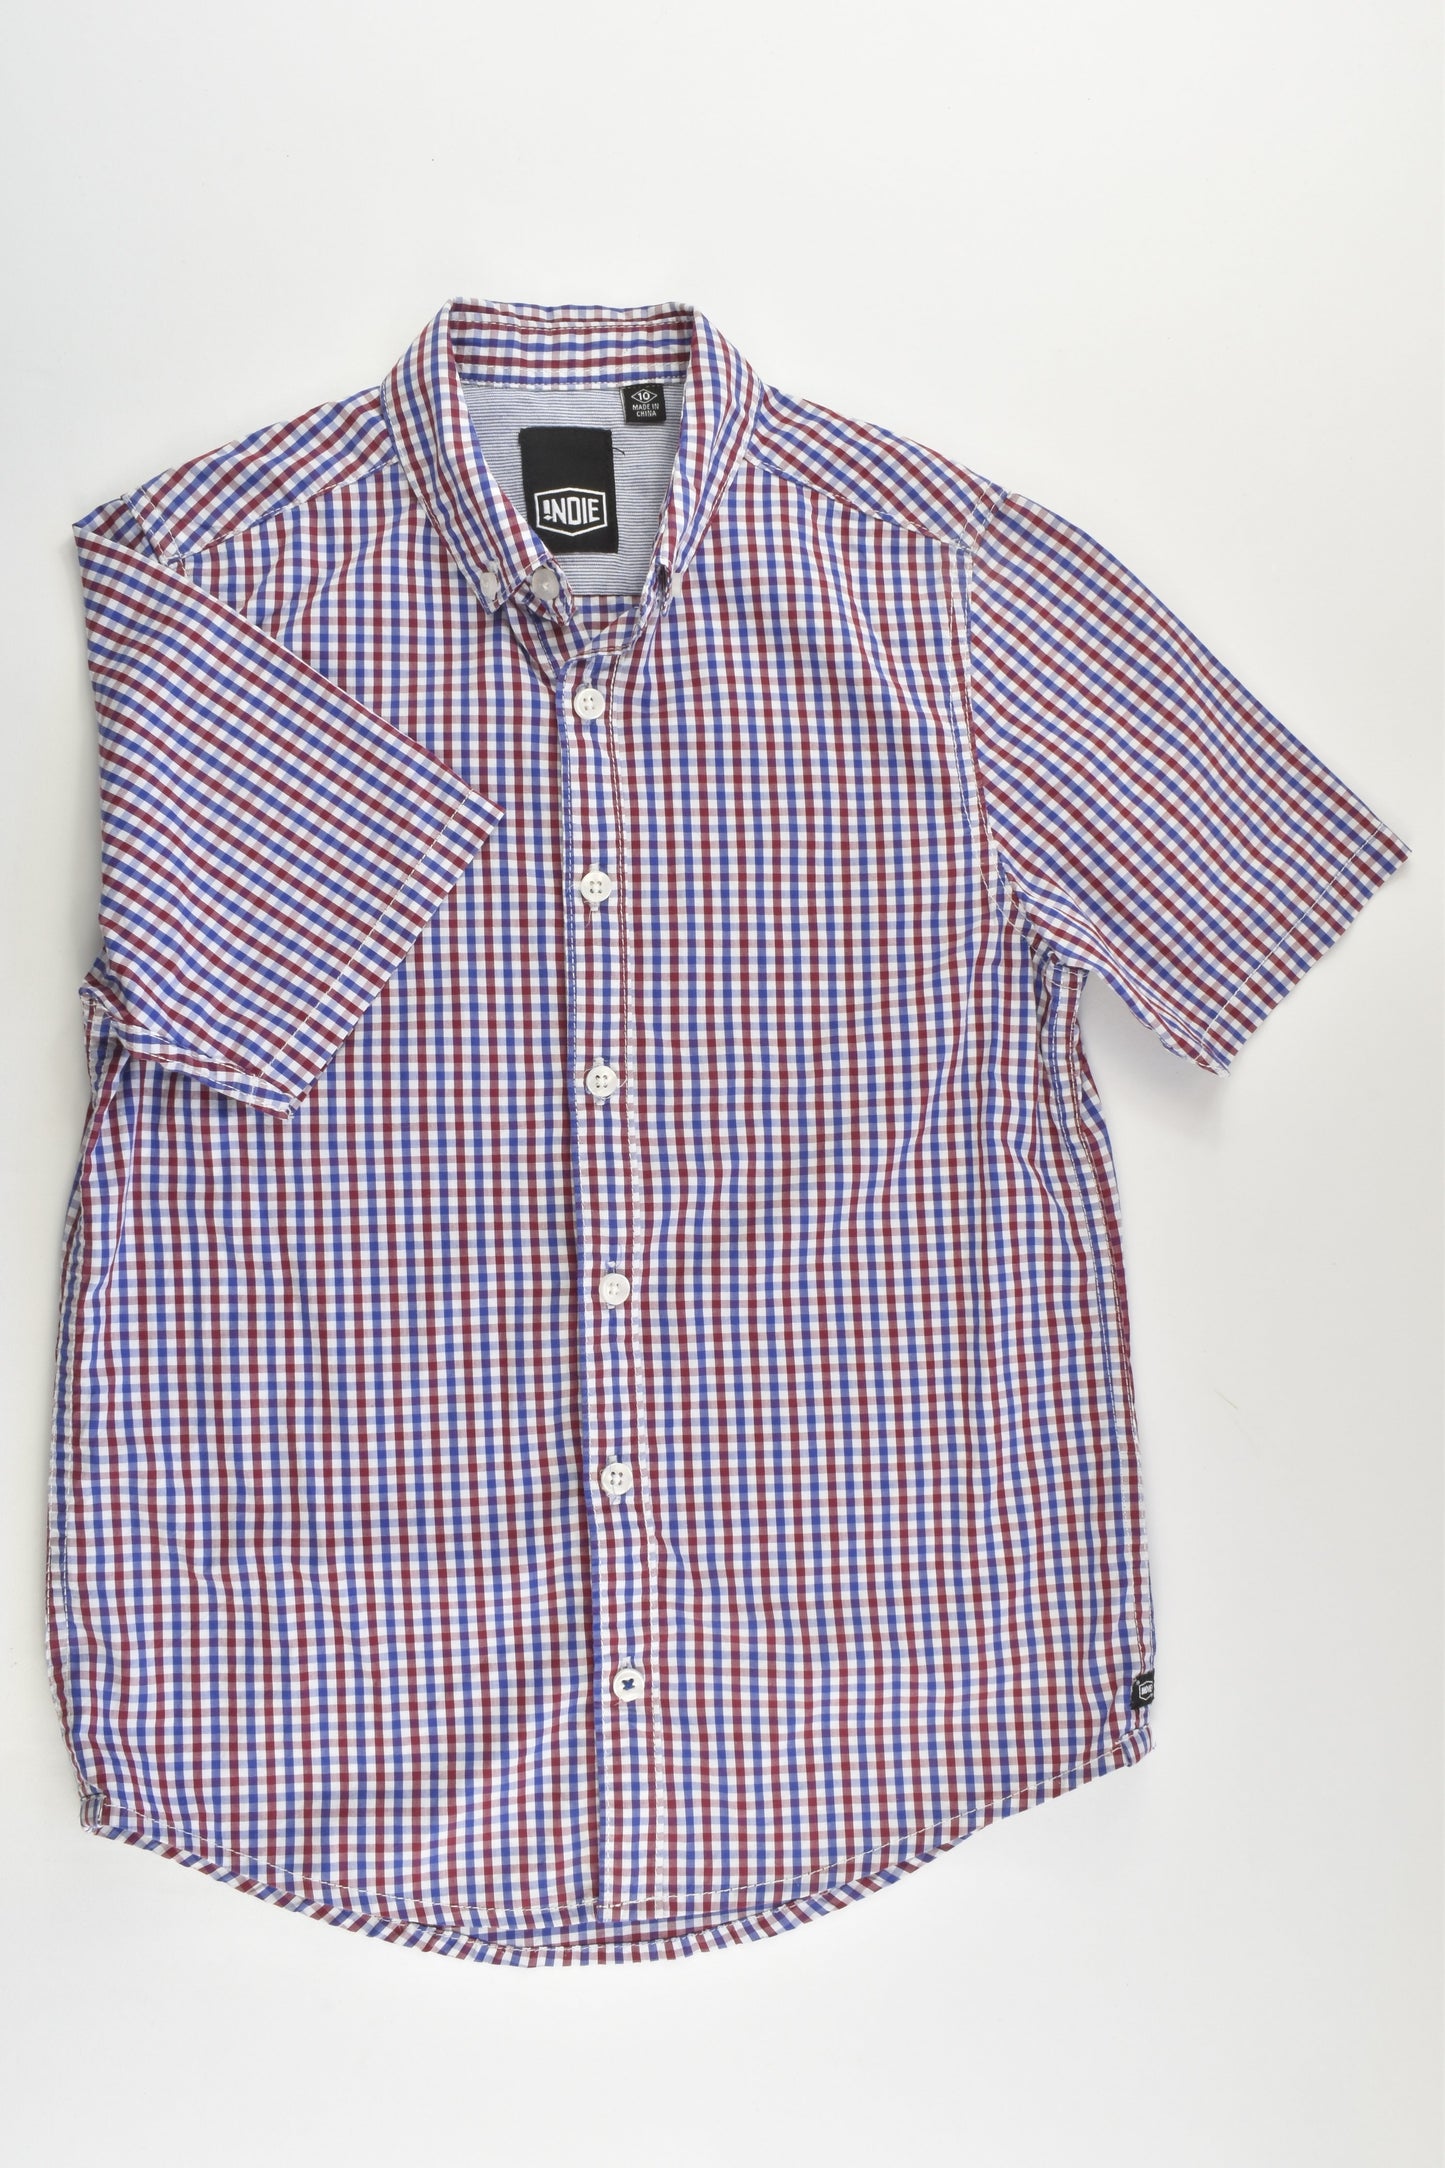 Indie Size 10 Checked Shirt